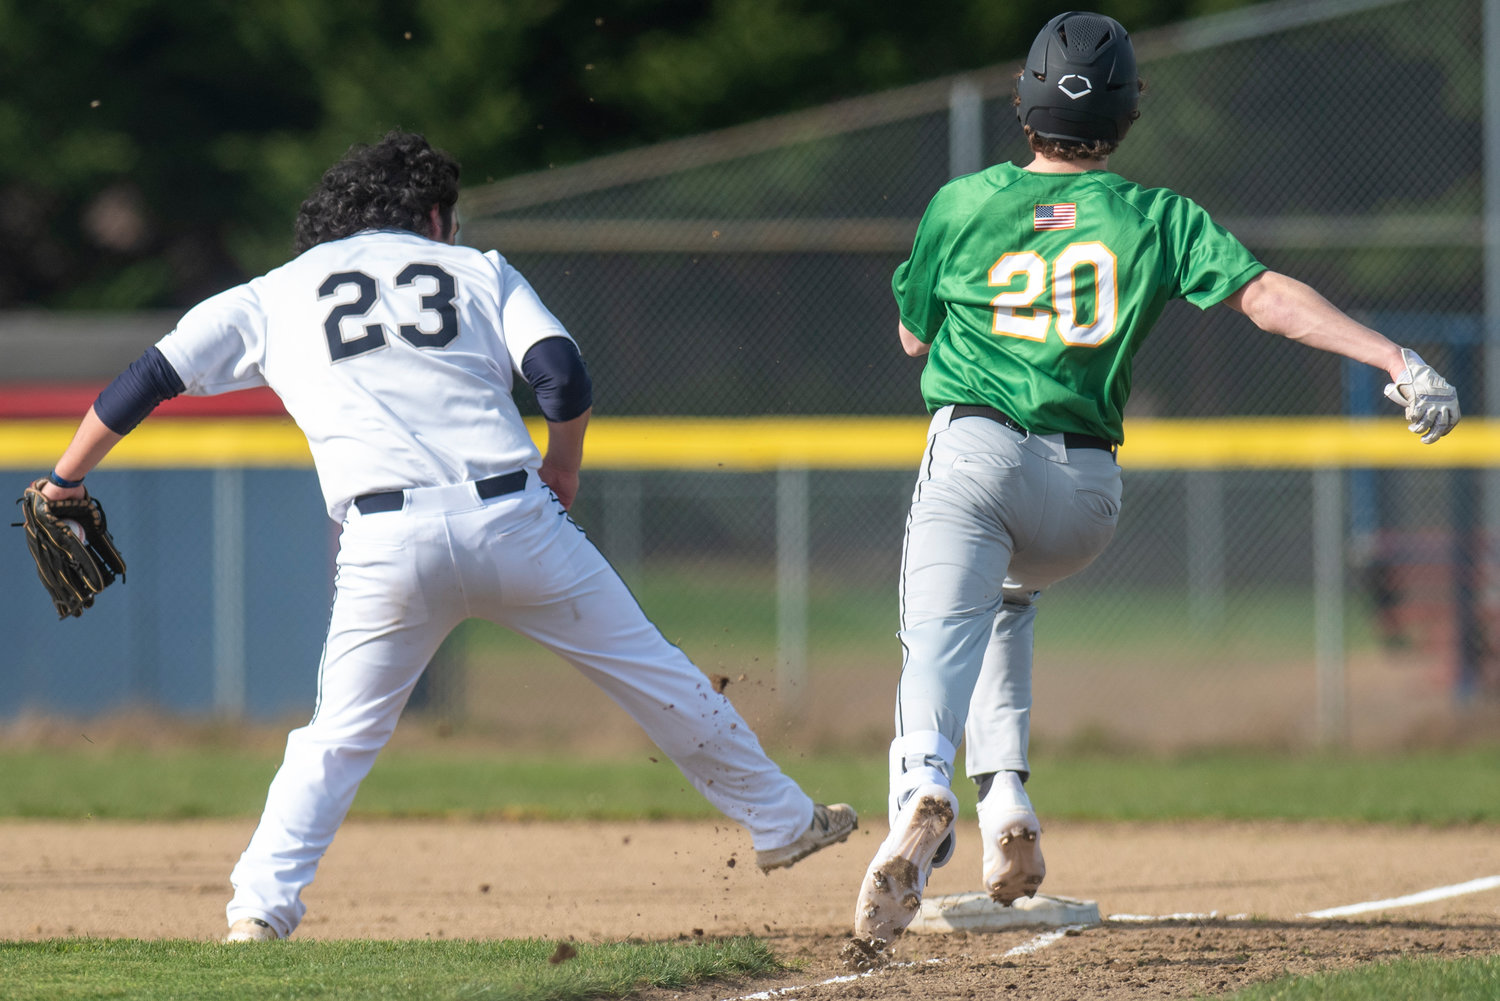 Black Hills pitcher Josephy Floyd (23) tries to beat Tumwater's Derek Thompson (20) to first base on March 24.